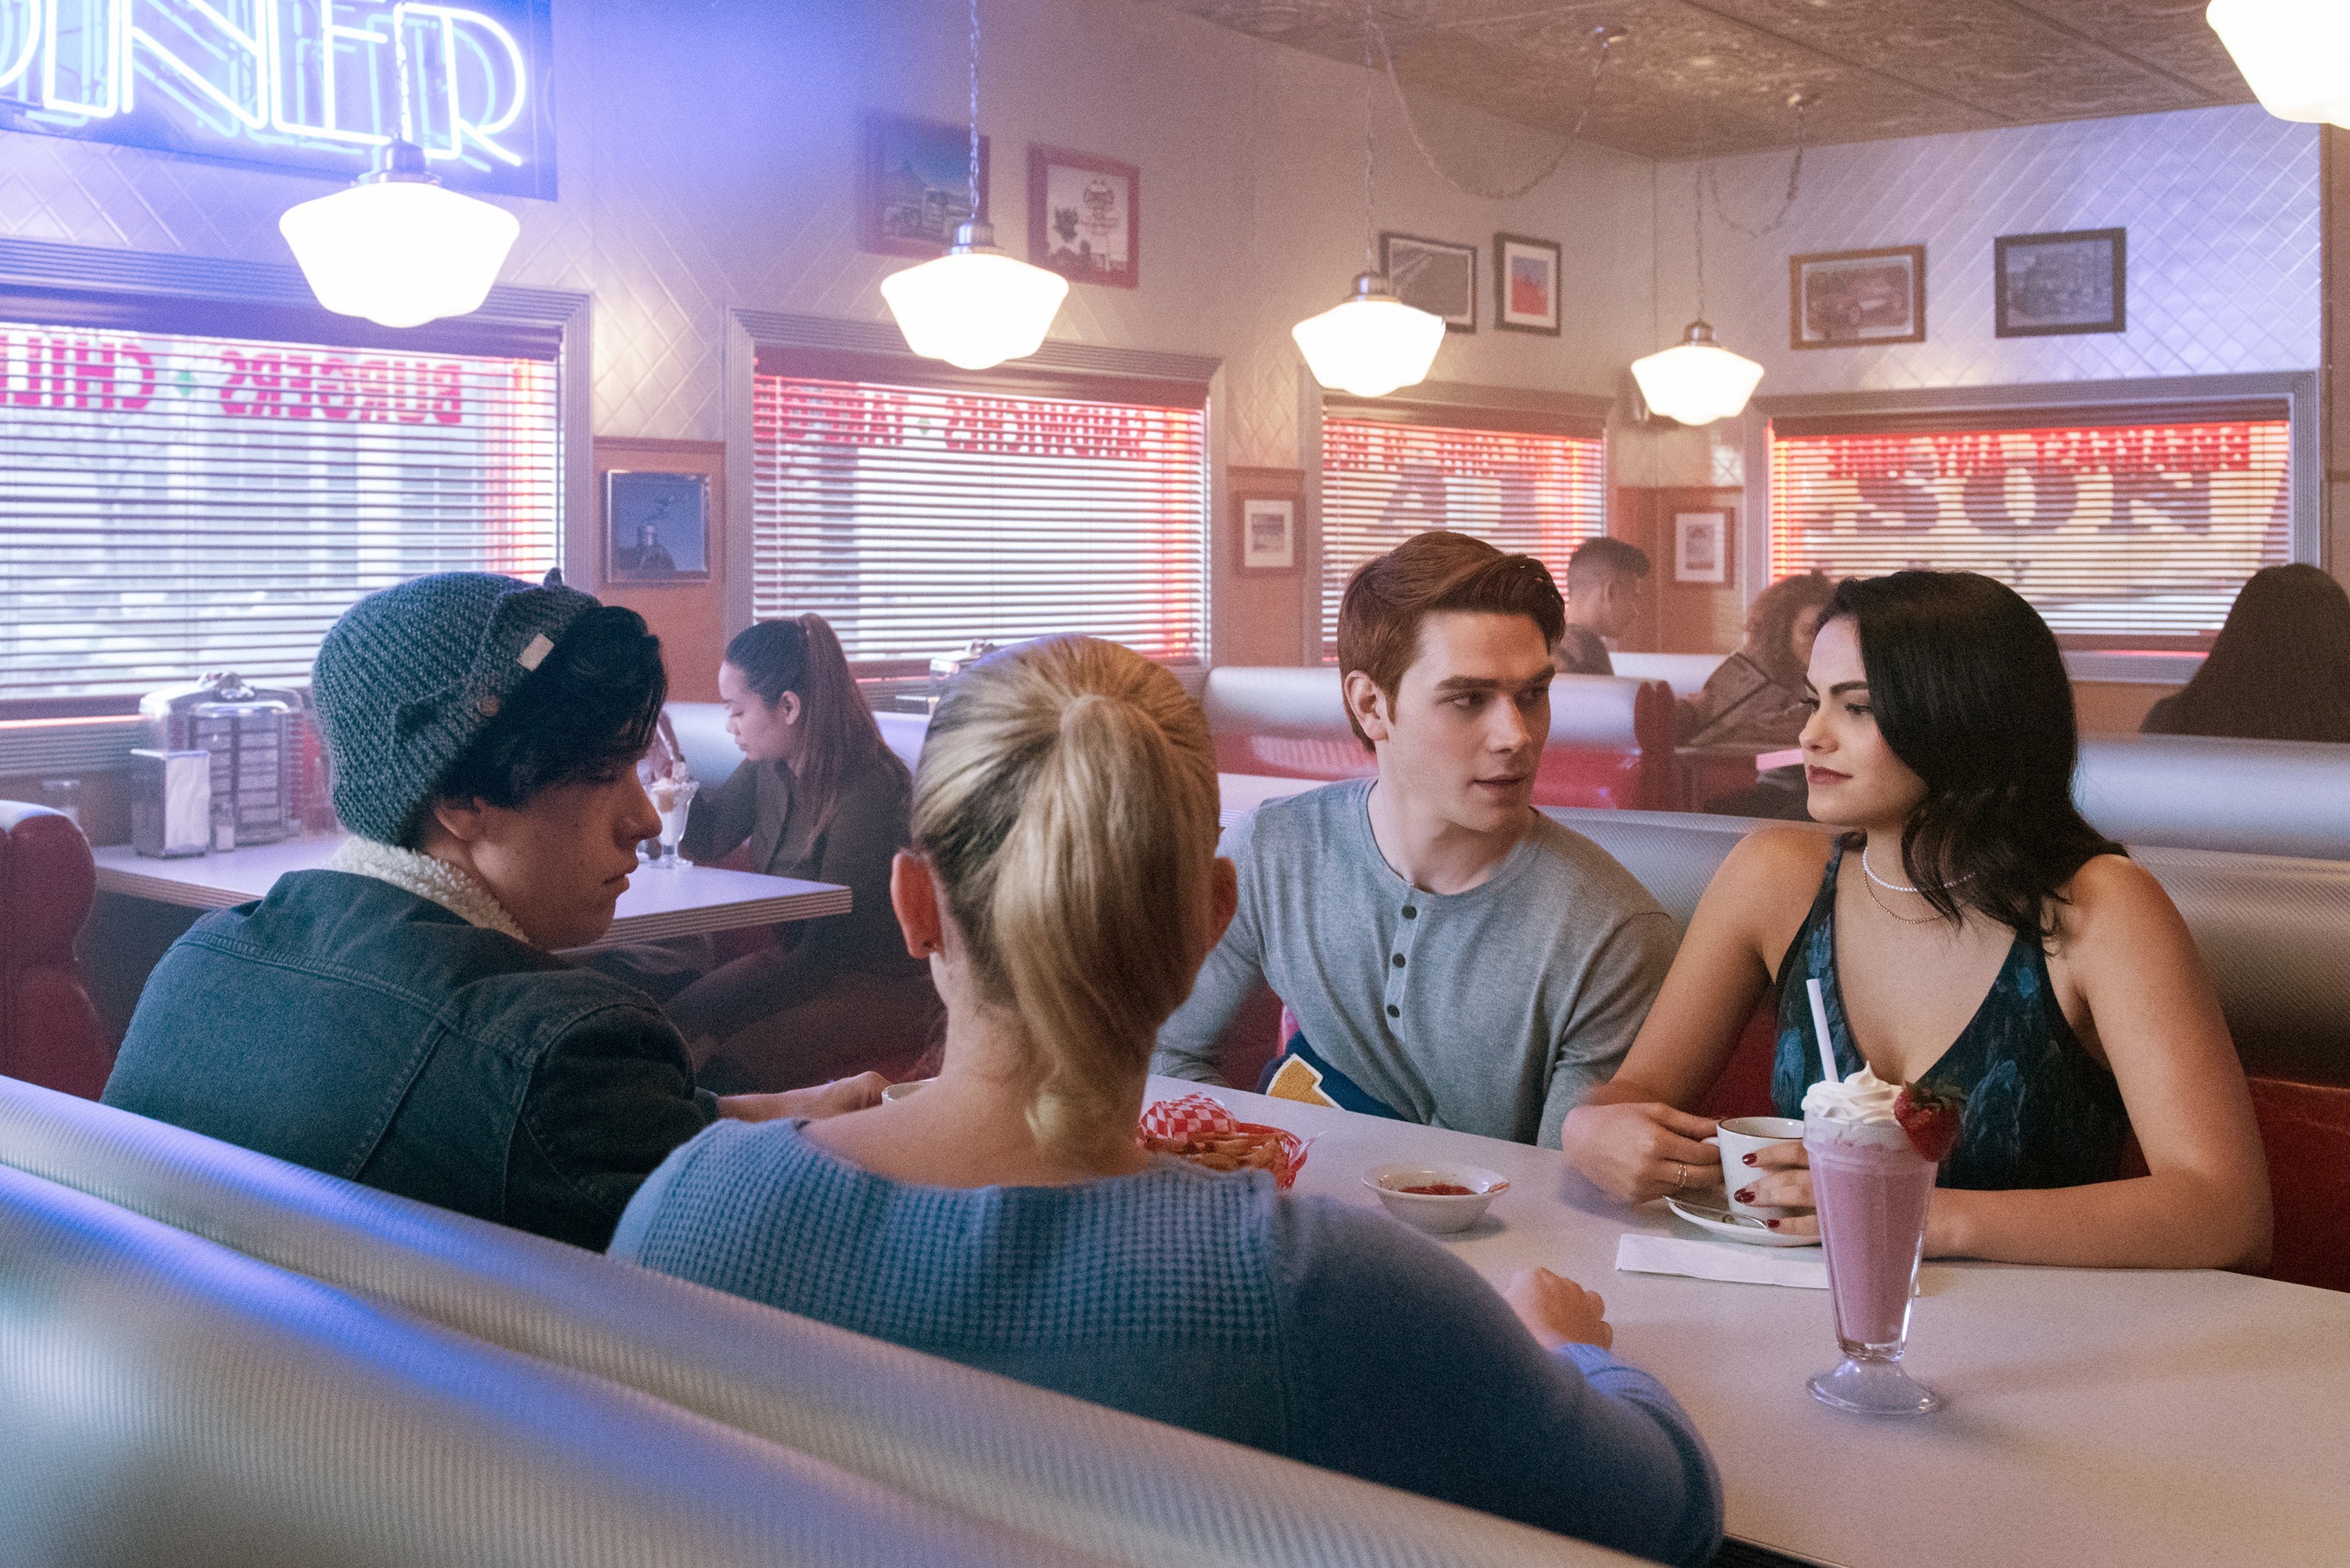 Image Rd Promo 1x08 The Outsiders 14 Betty Jughead Archie Veronica Riverdale Wiki 